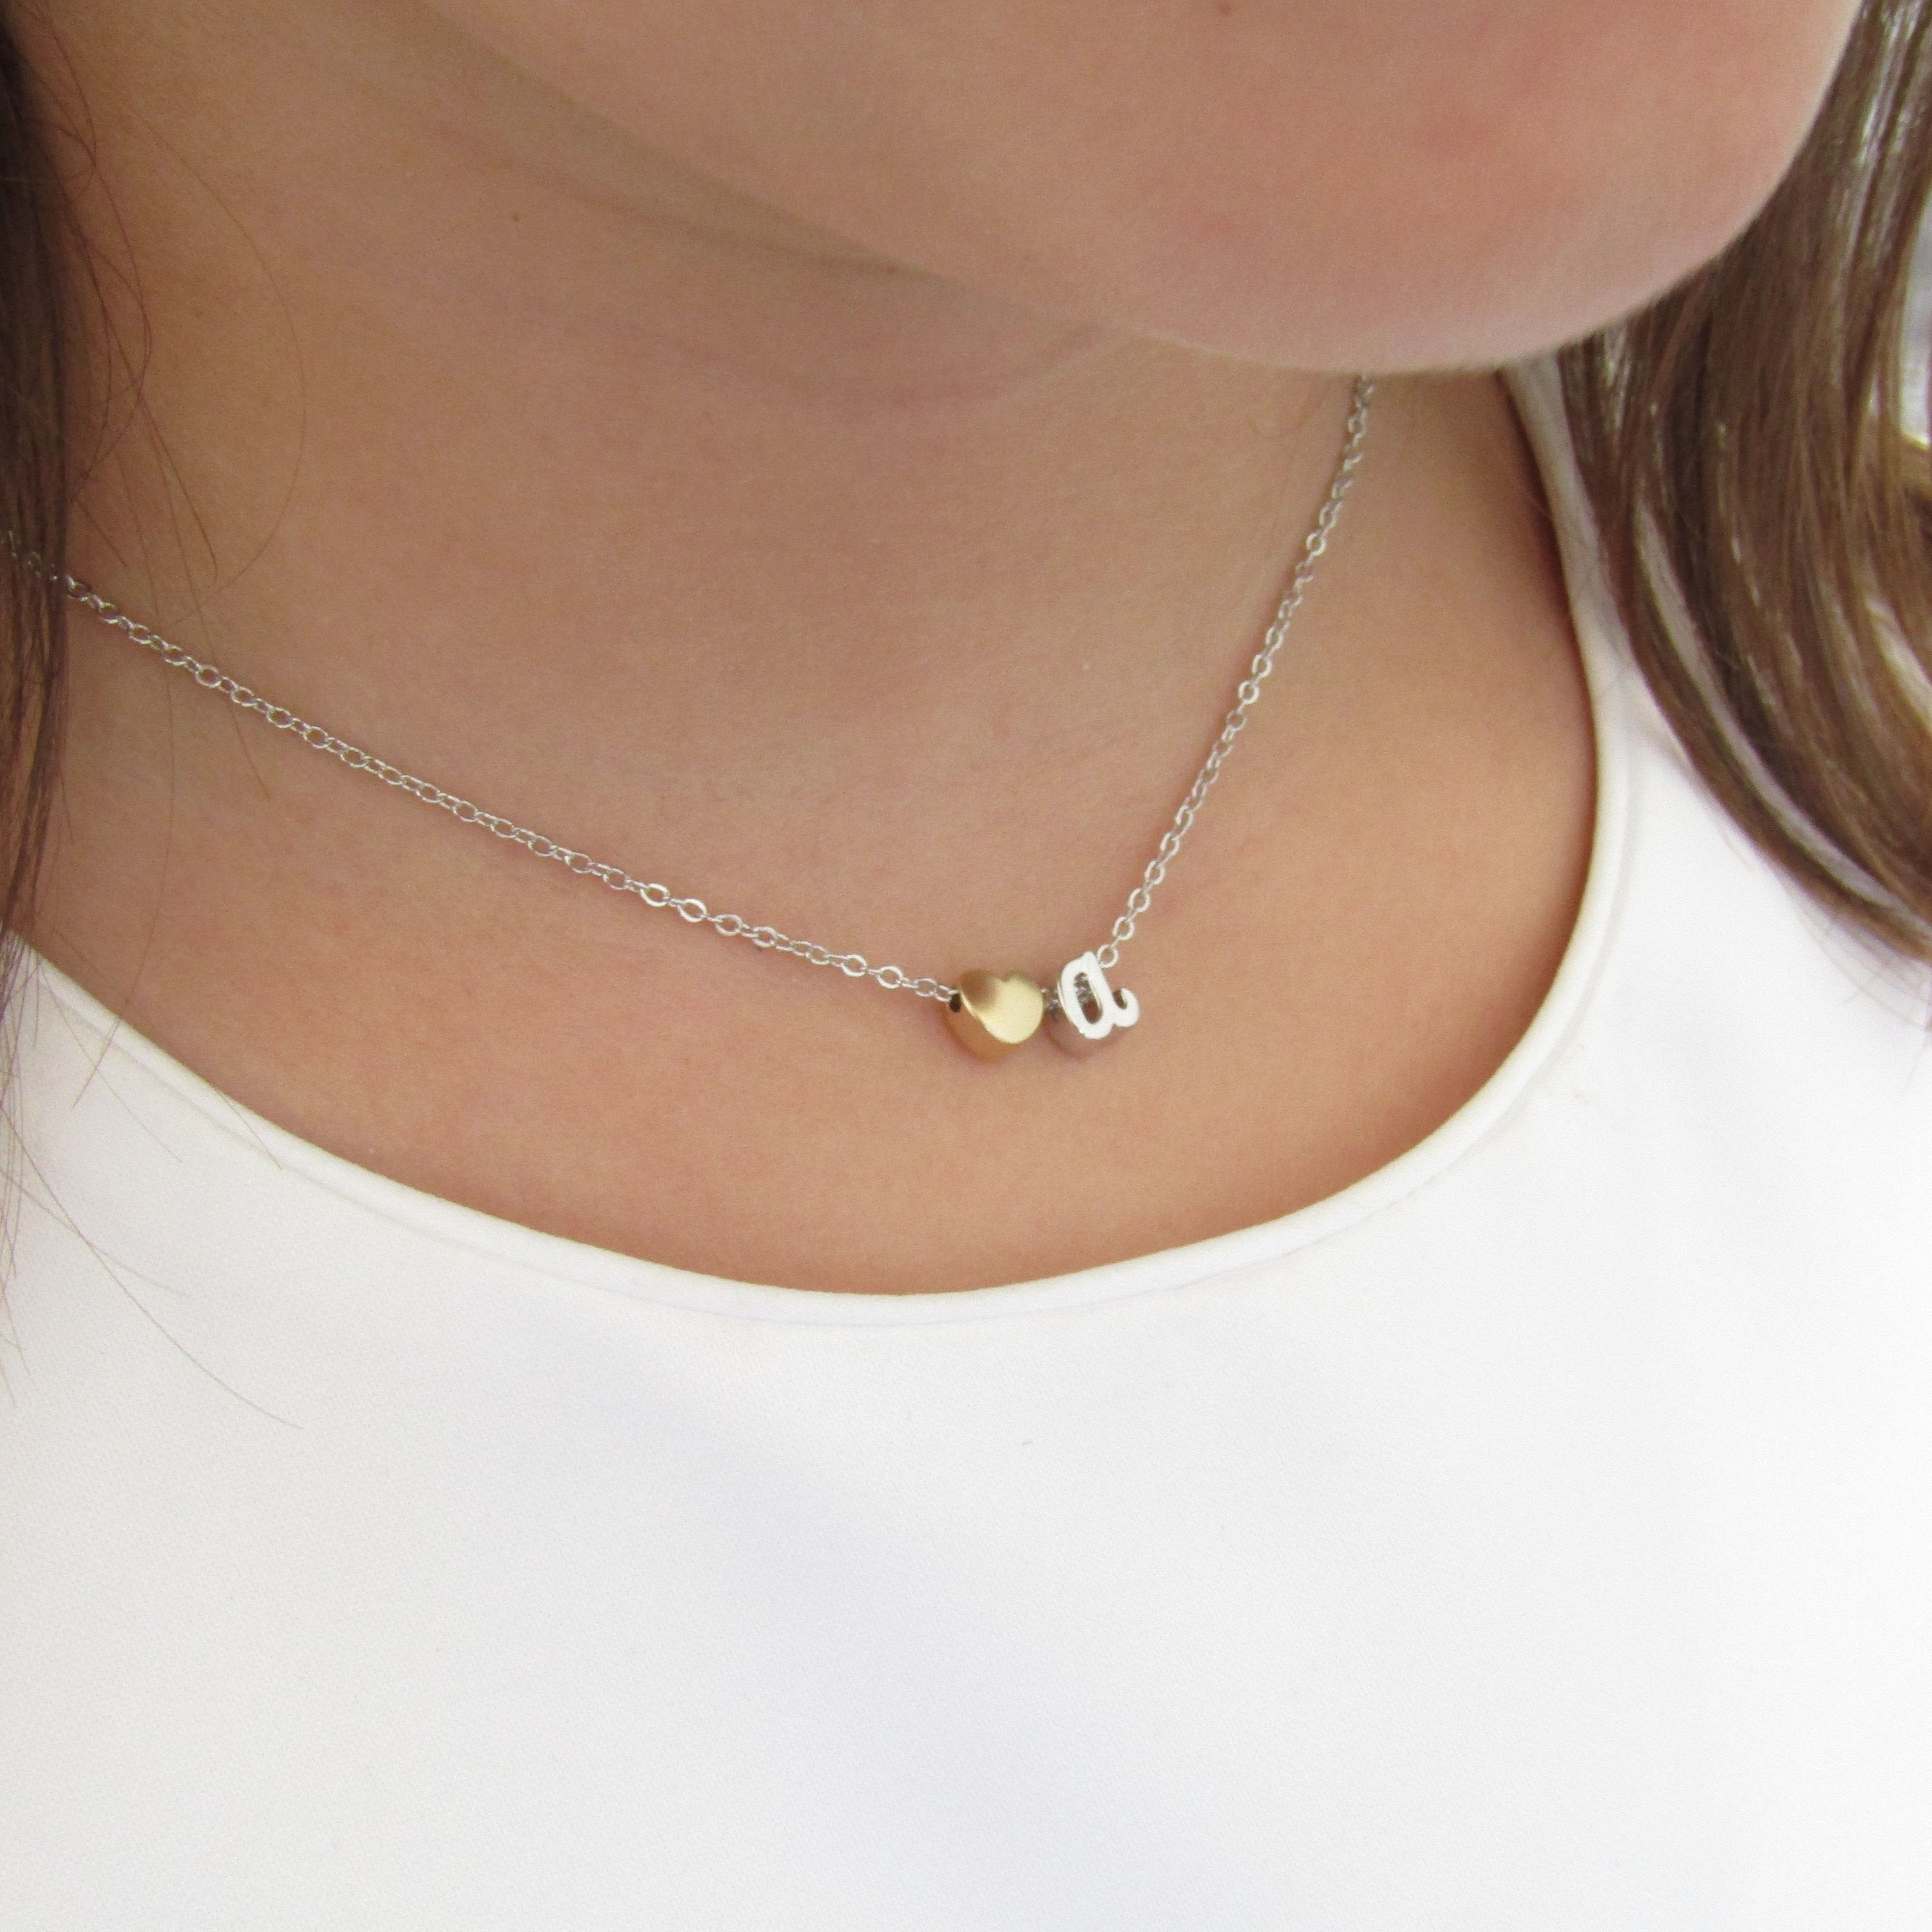 Initial Disc Necklace Small Coin Initial Necklace Gold Letter Necklace  Delicate Monogram Necklace Bridesmaid Gift - Etsy | Initial necklace gold,  Initial disc necklace, Initial necklace